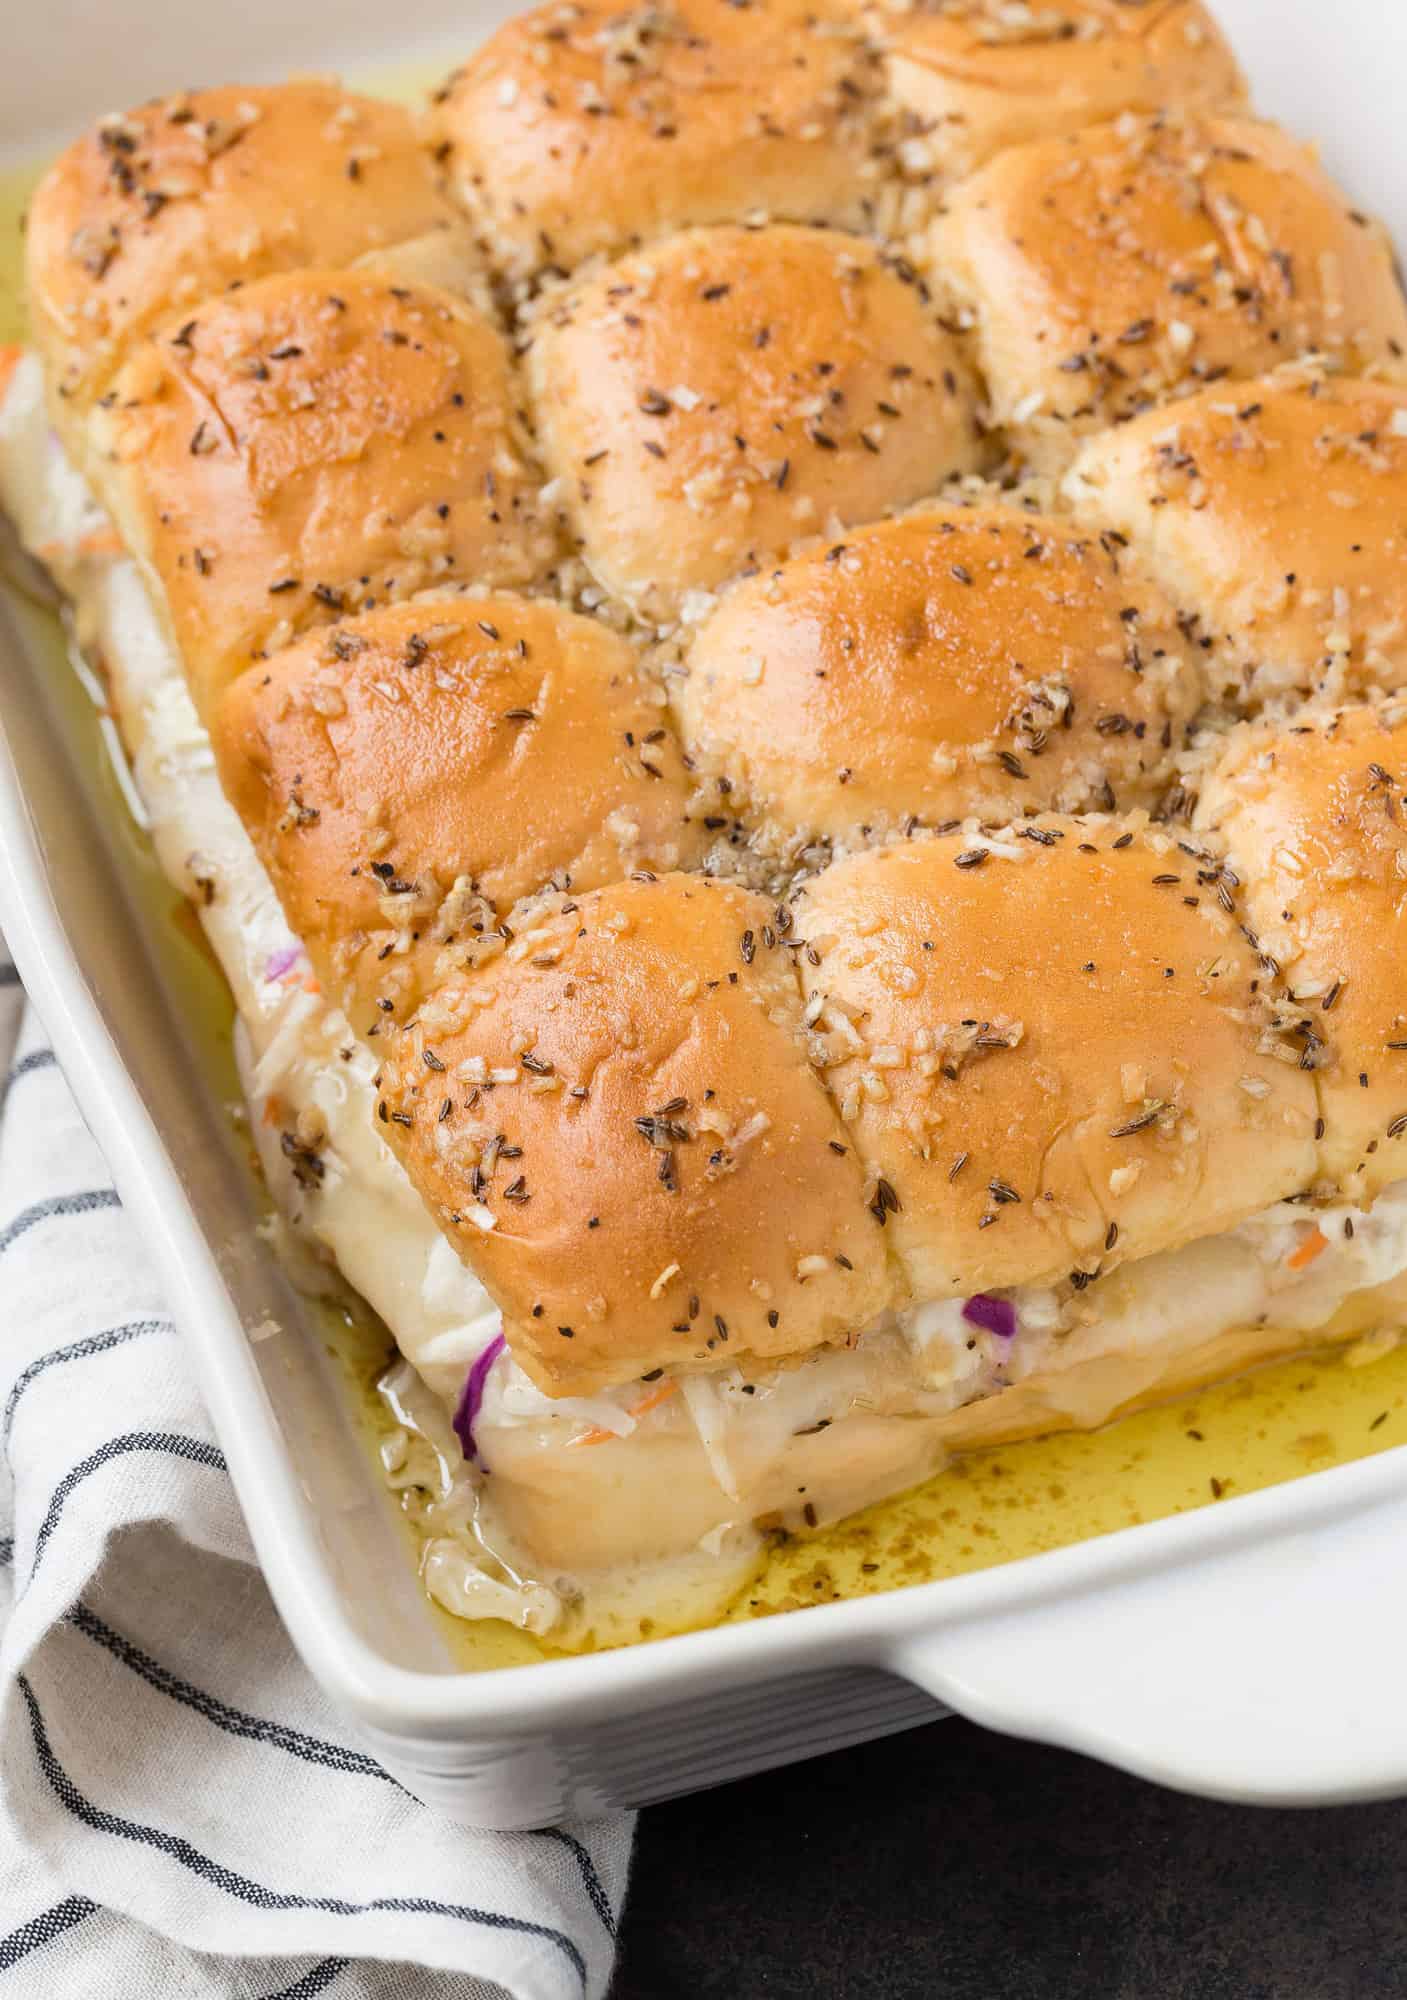 Rachel Sandwich sliders baked in a white baking dish, topped with caraway seeds.